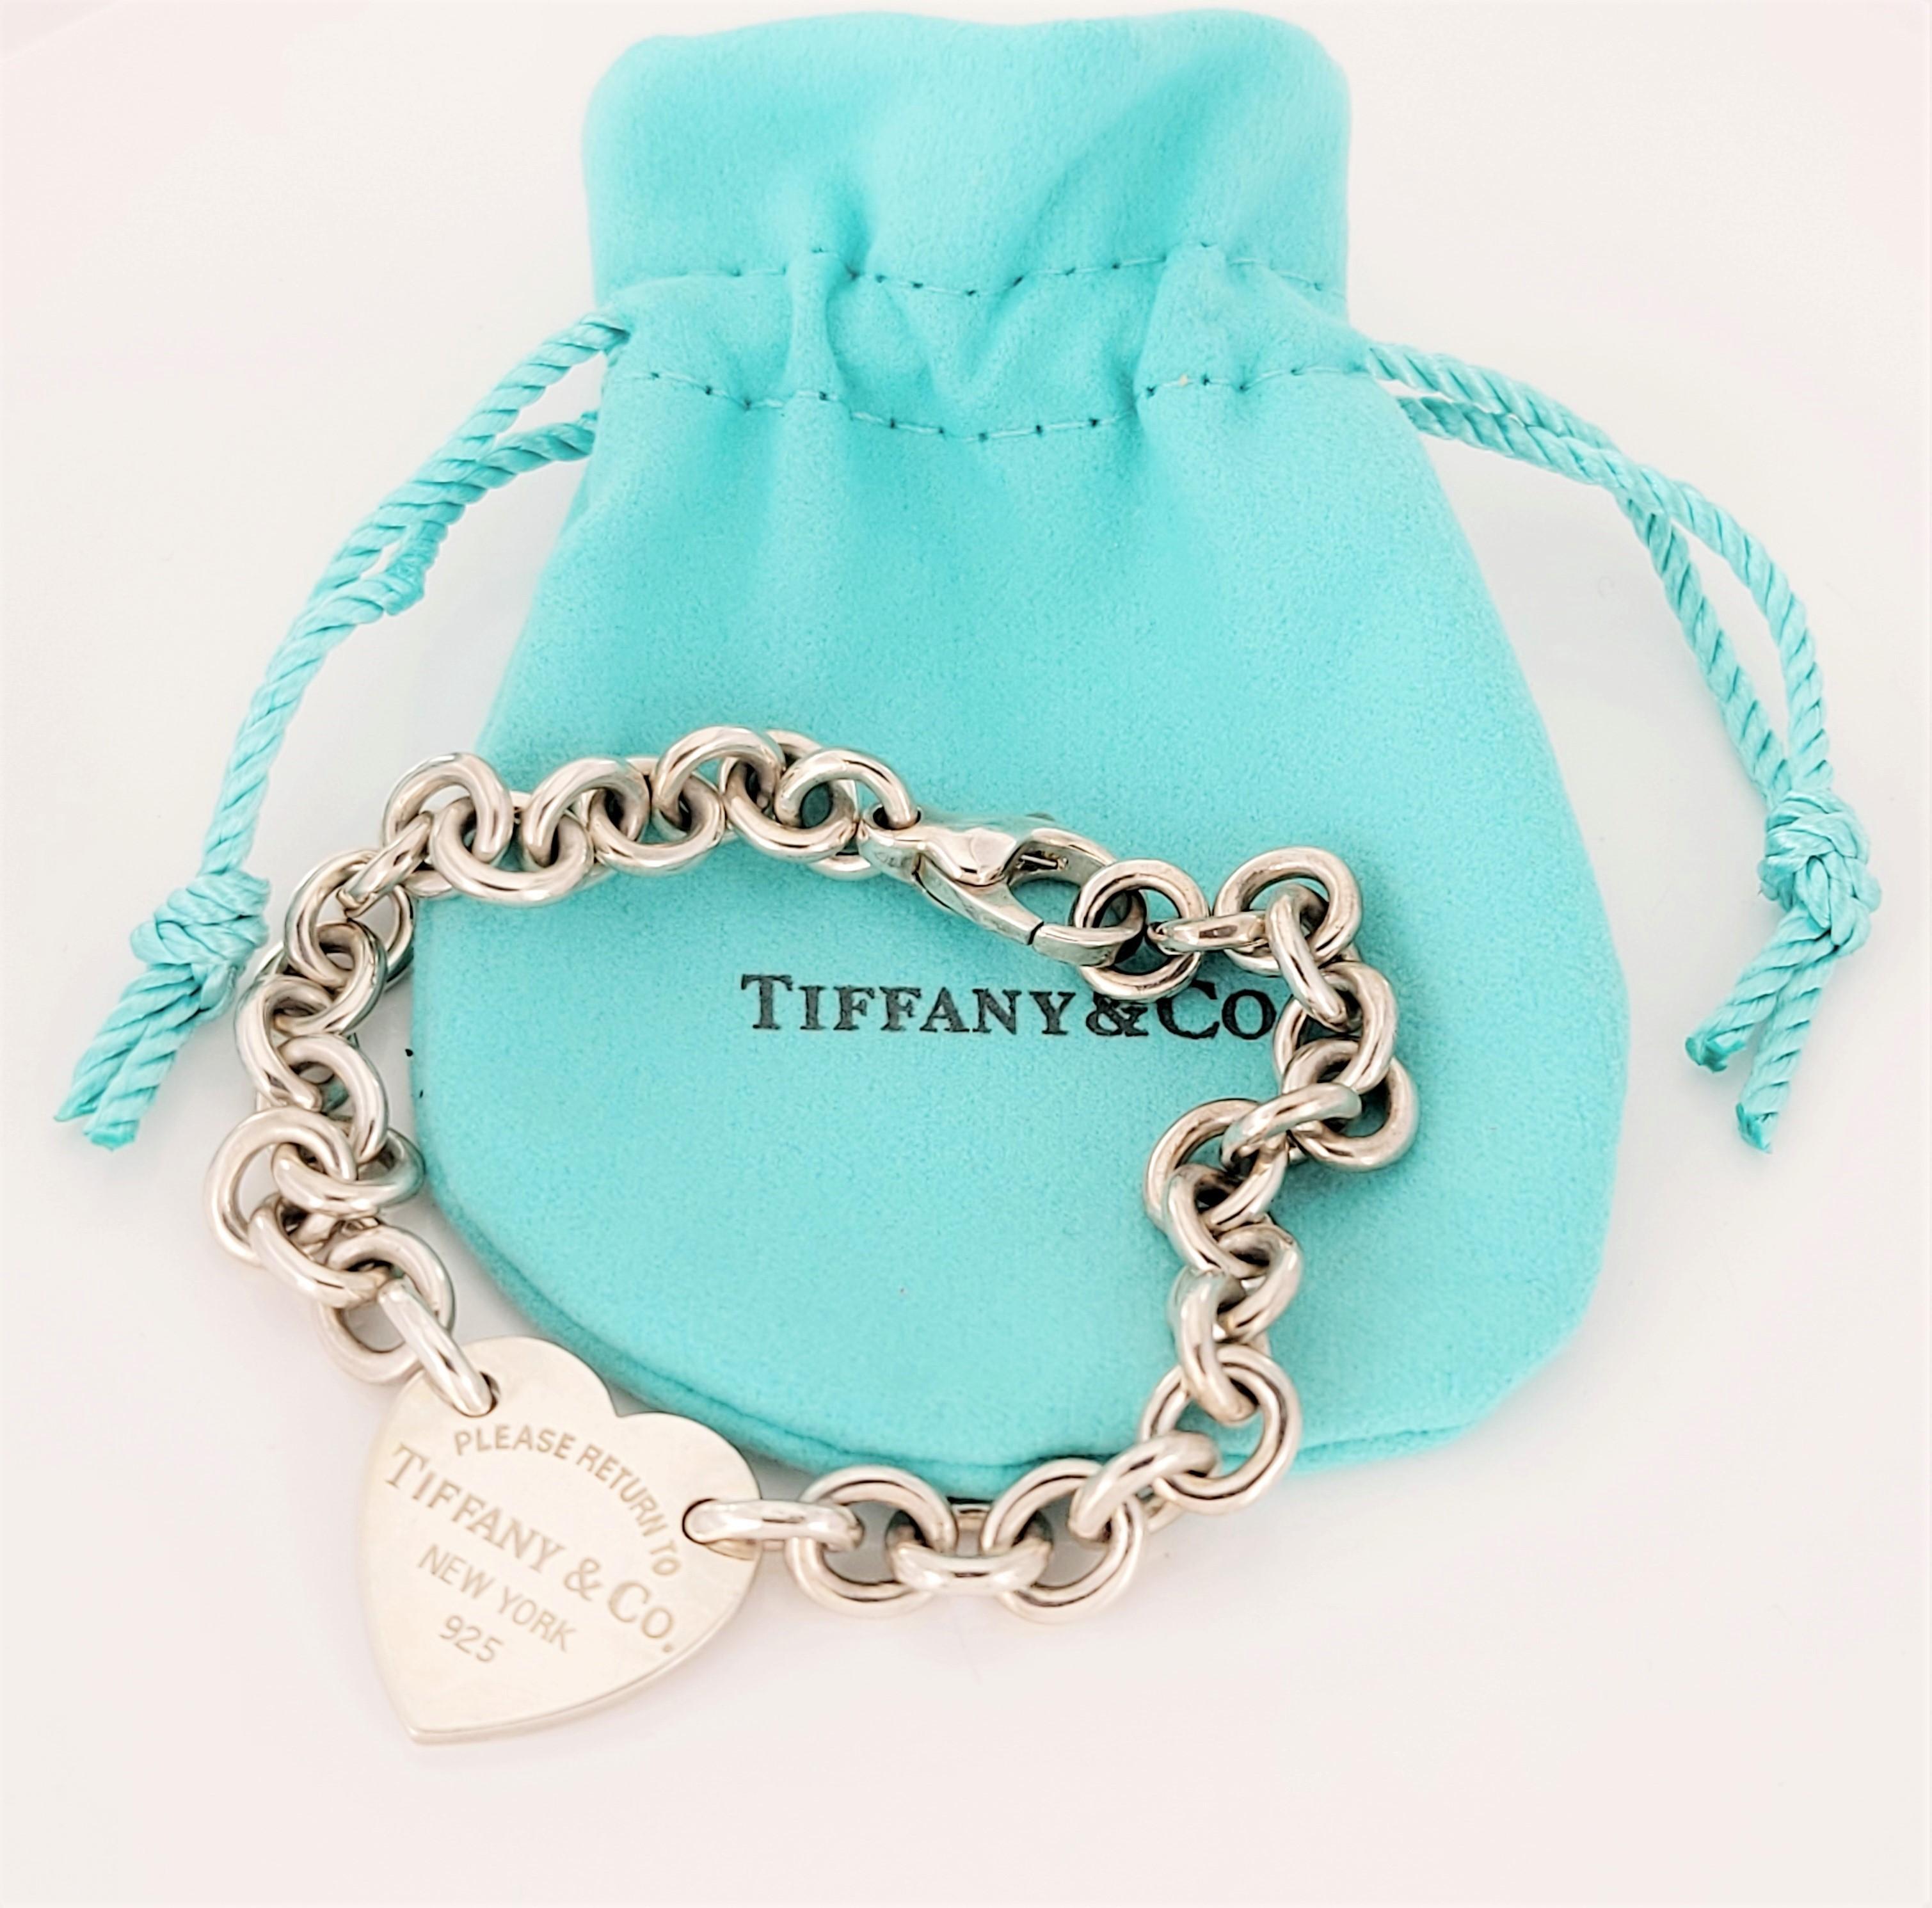 Women's Return to Tiffany & co  Heart Tag Charm Bracelet in Silver For Sale